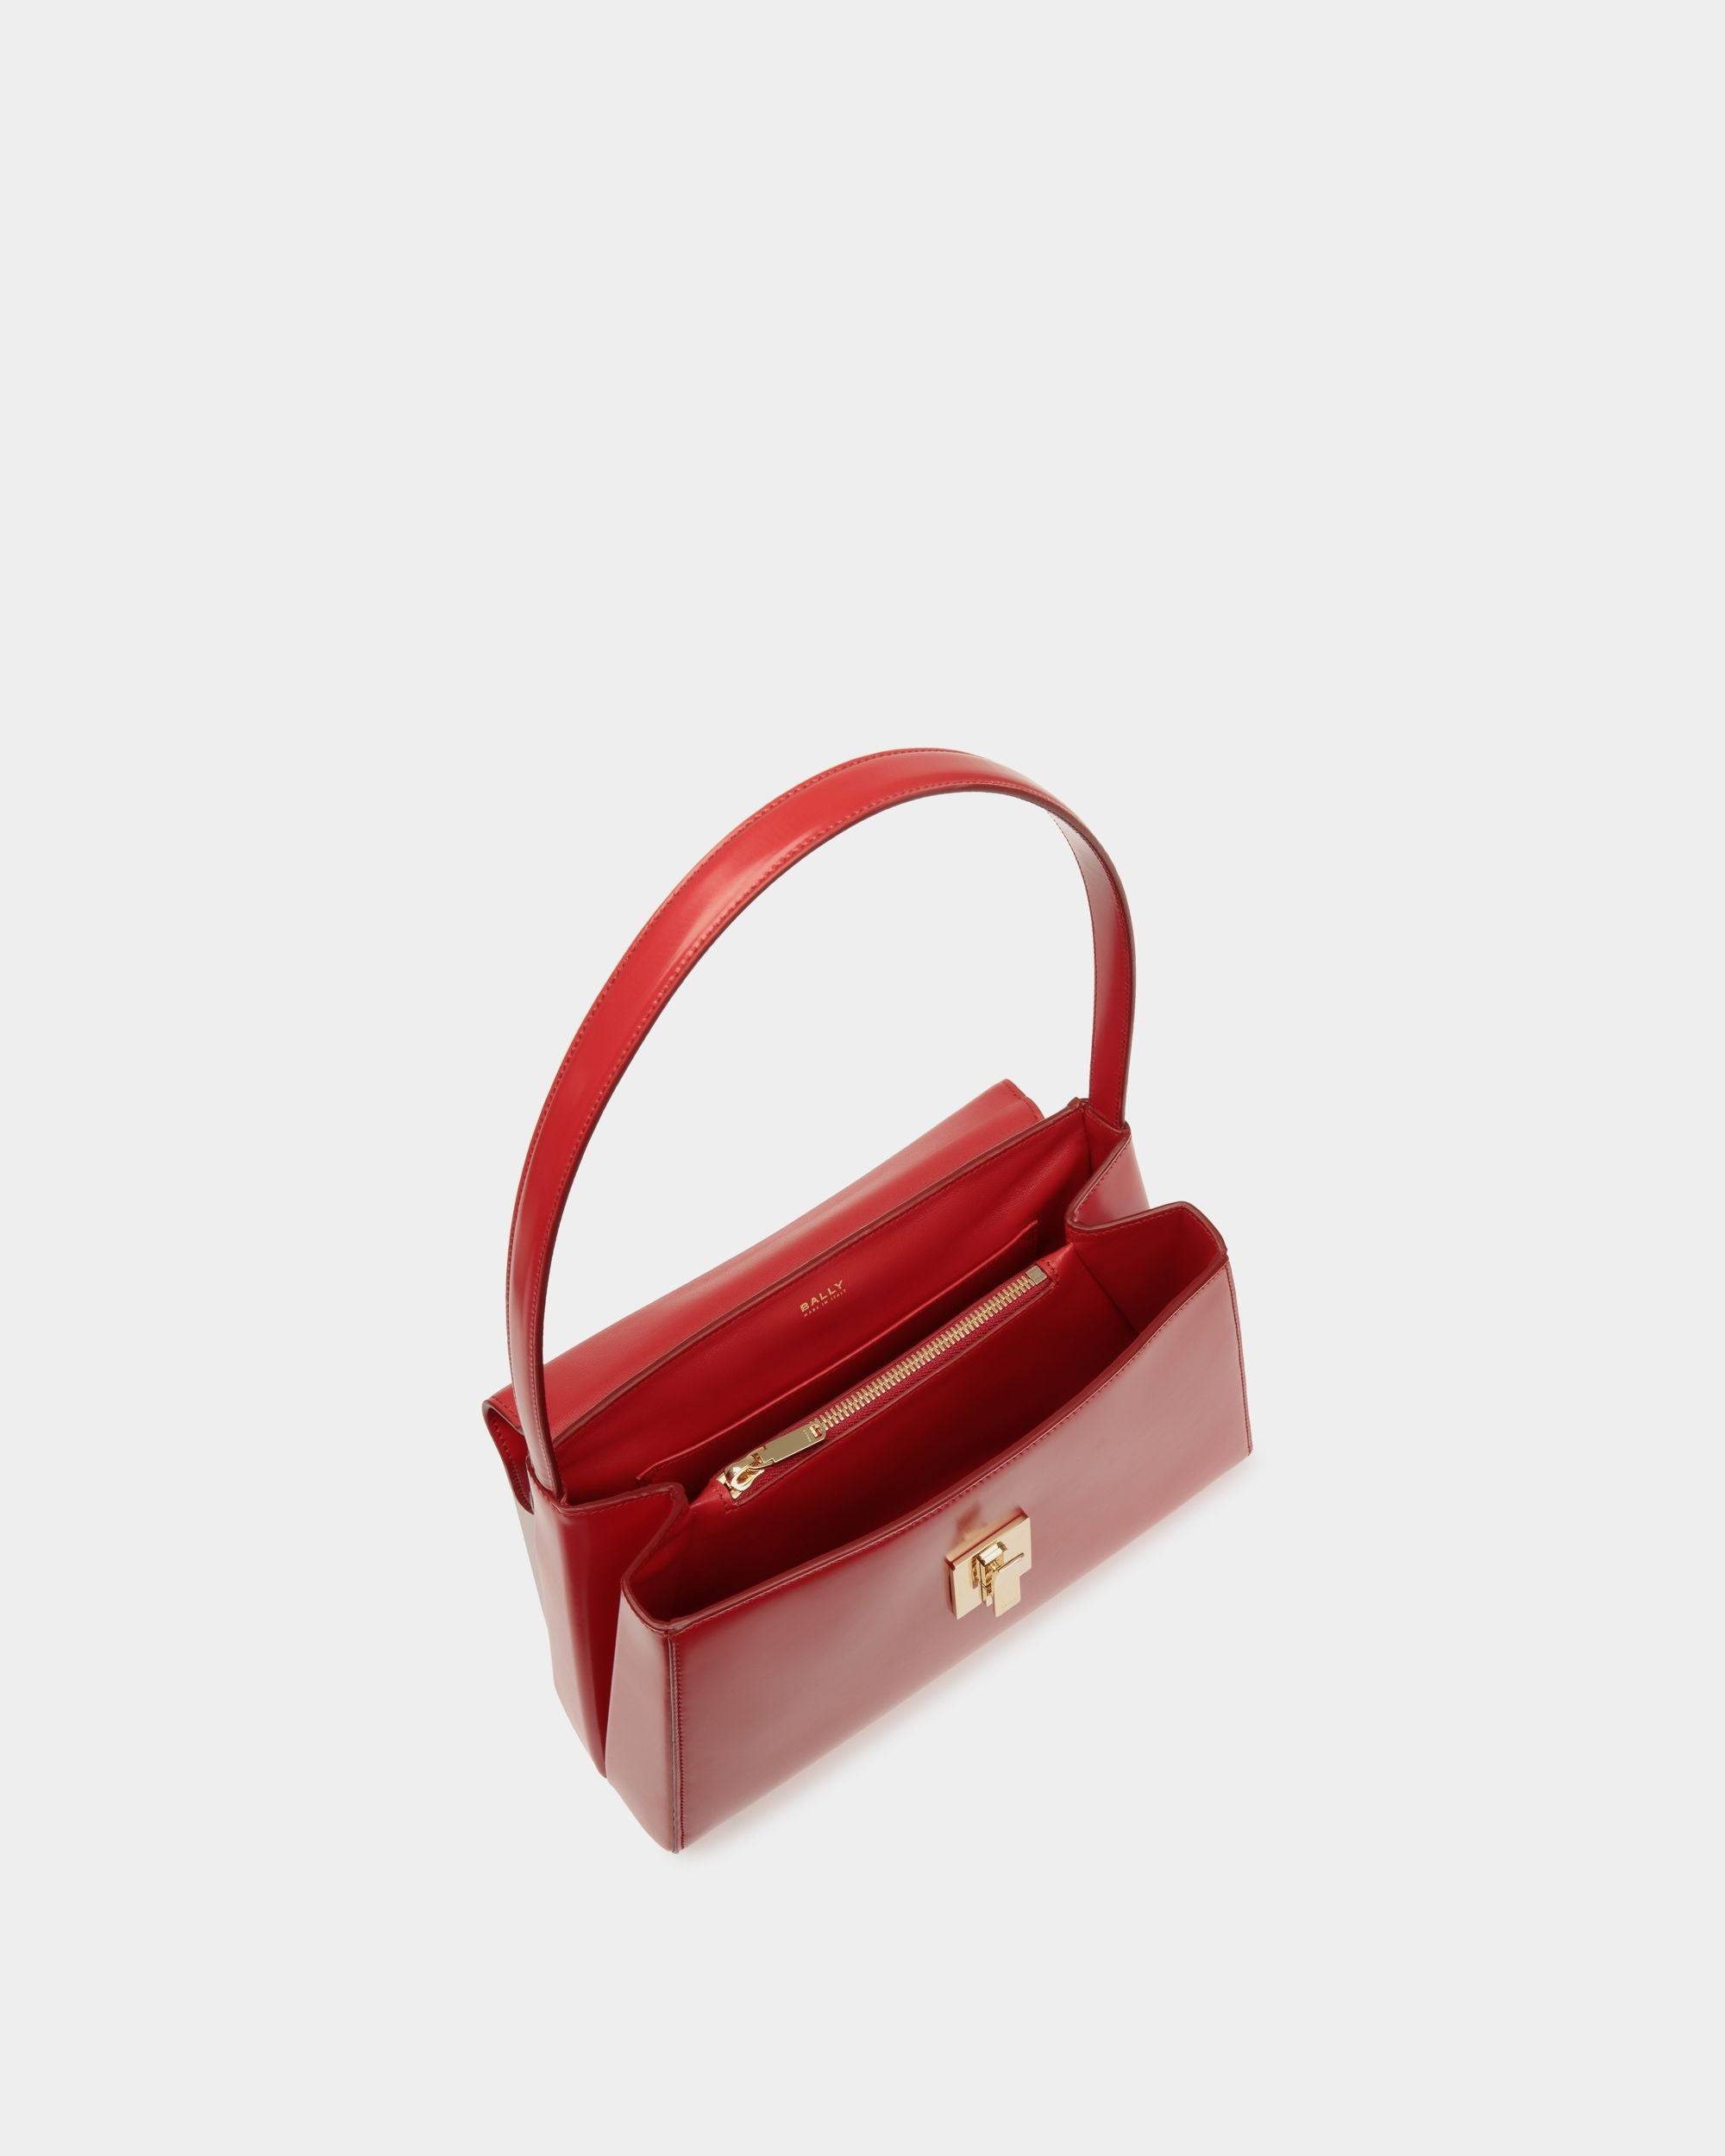 Ollam | Women's Shoulder Bag in Candy Red Brushed Leather | Bally | Still Life Open / Inside